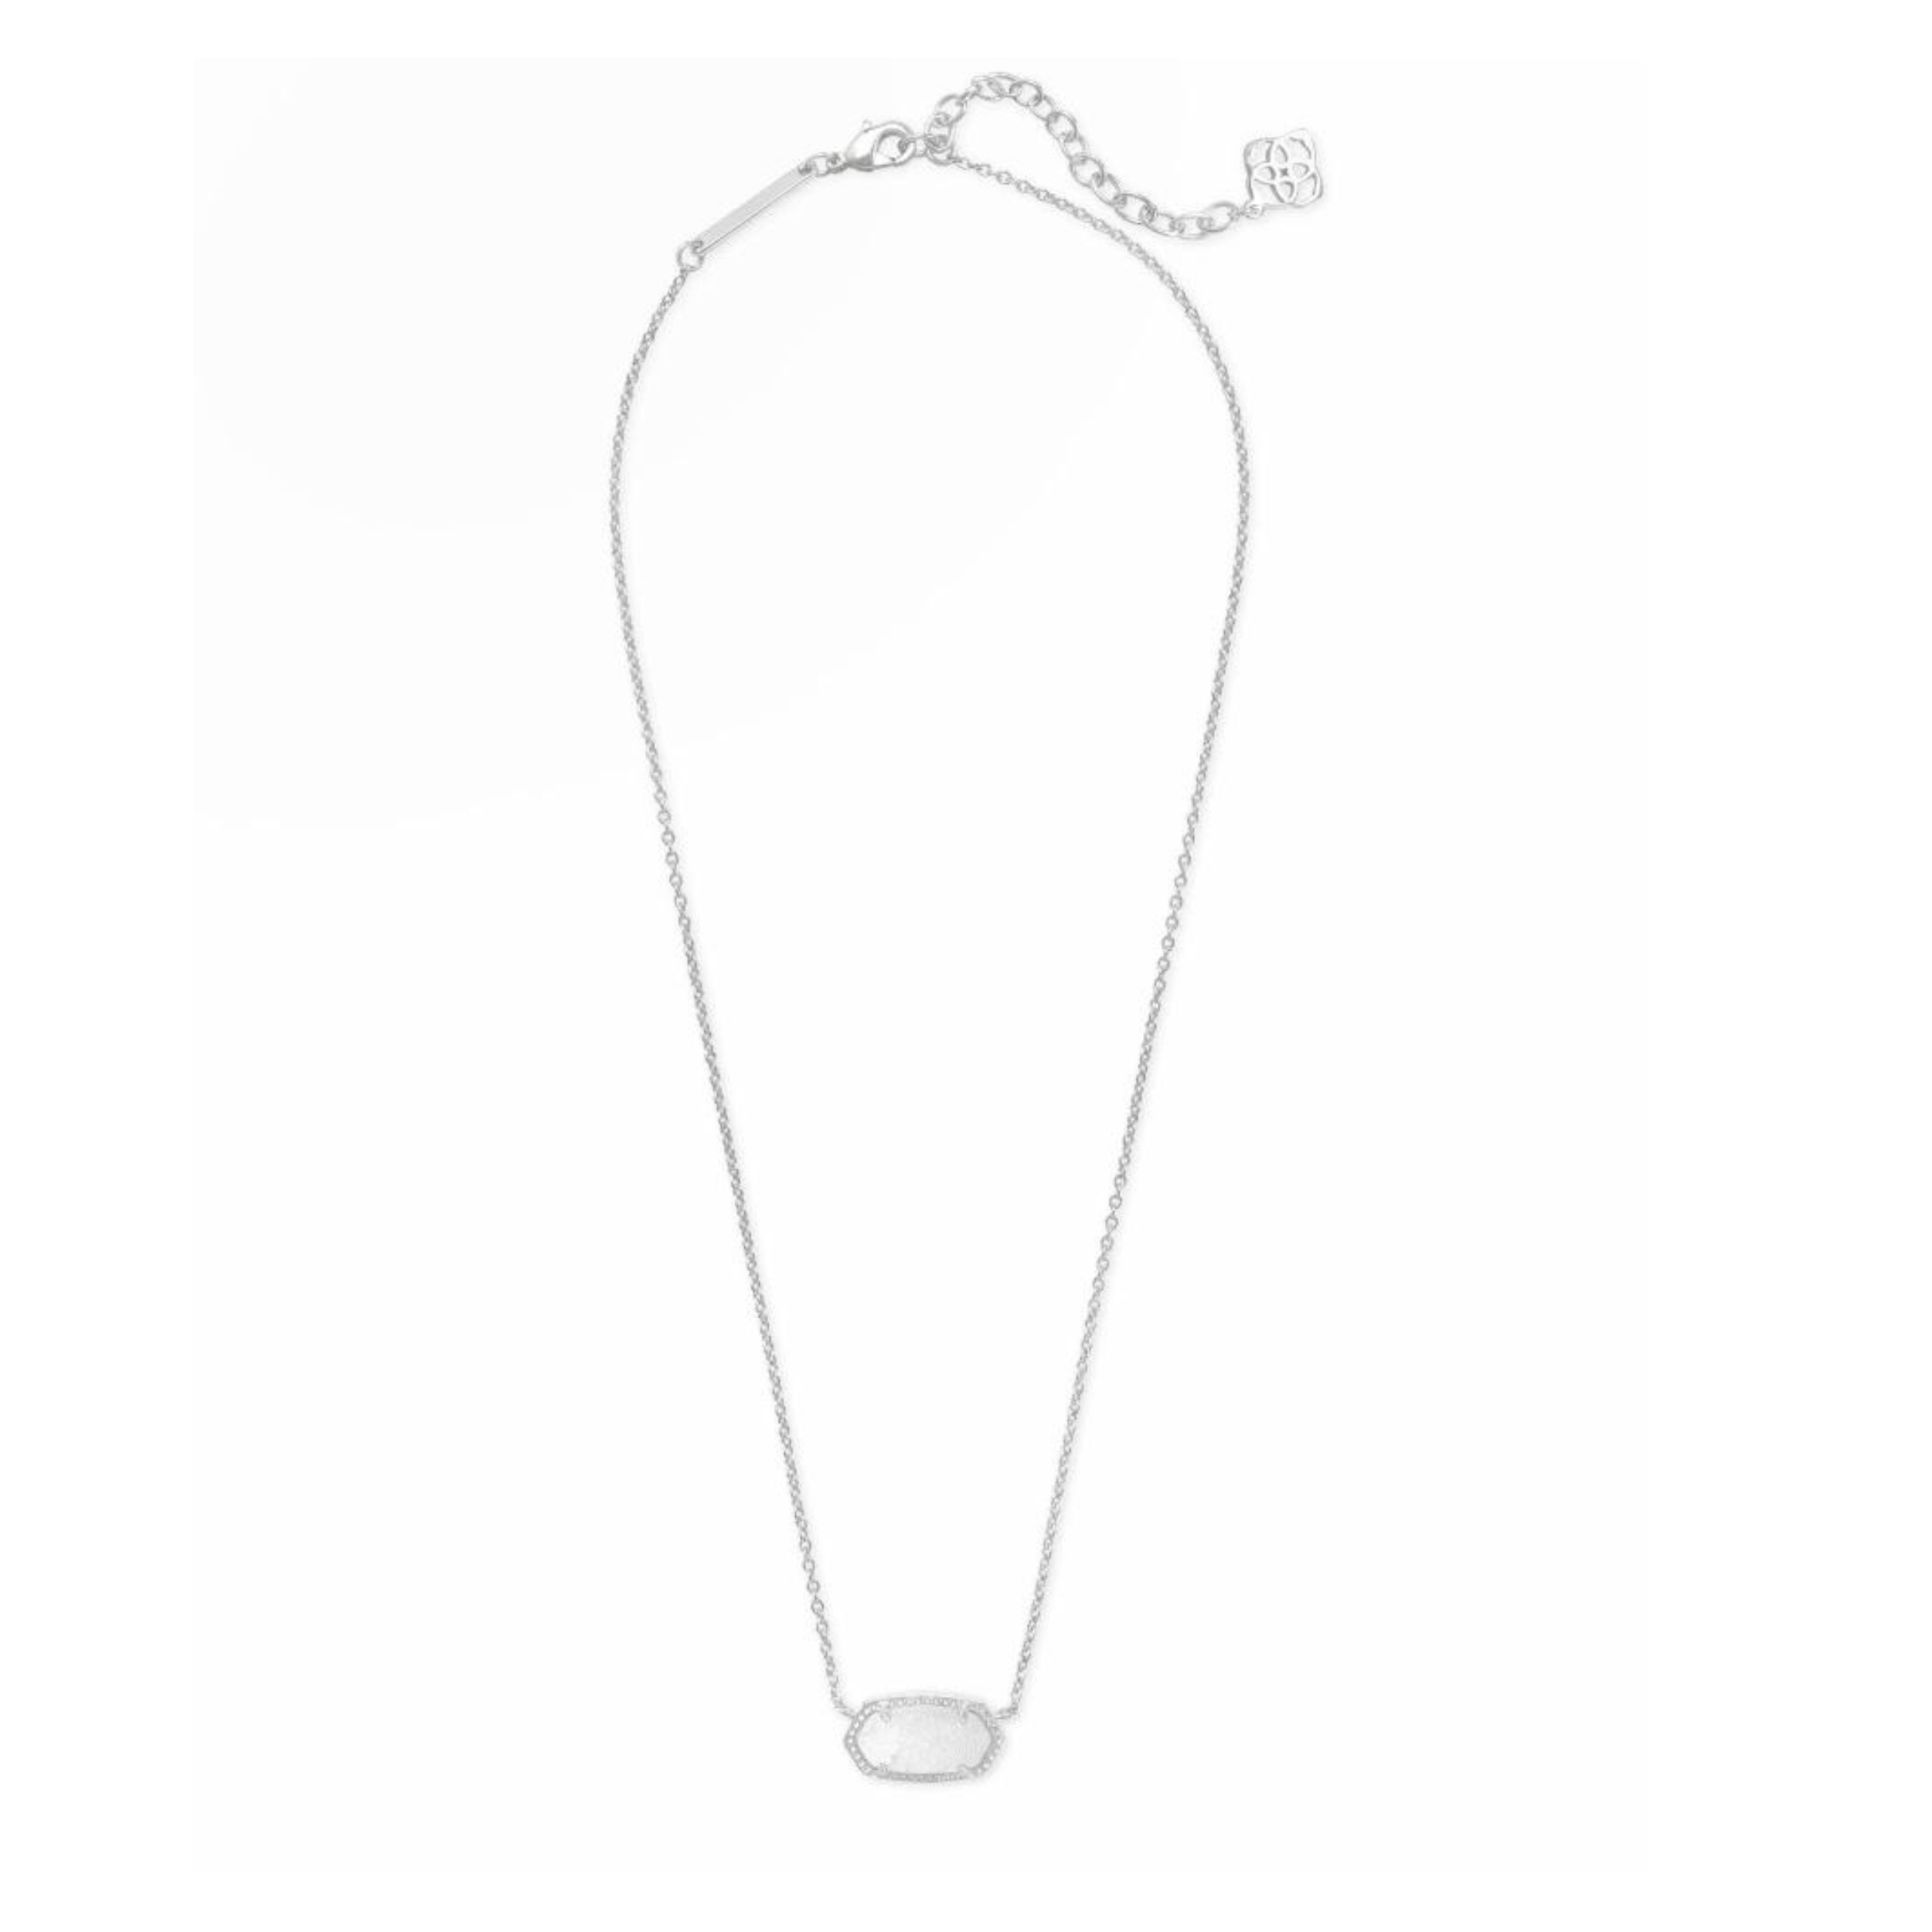 Kendra Scott | Elisa Silver Pendant Necklace in White Kyocera Opal - Giddy Up Glamour Boutique